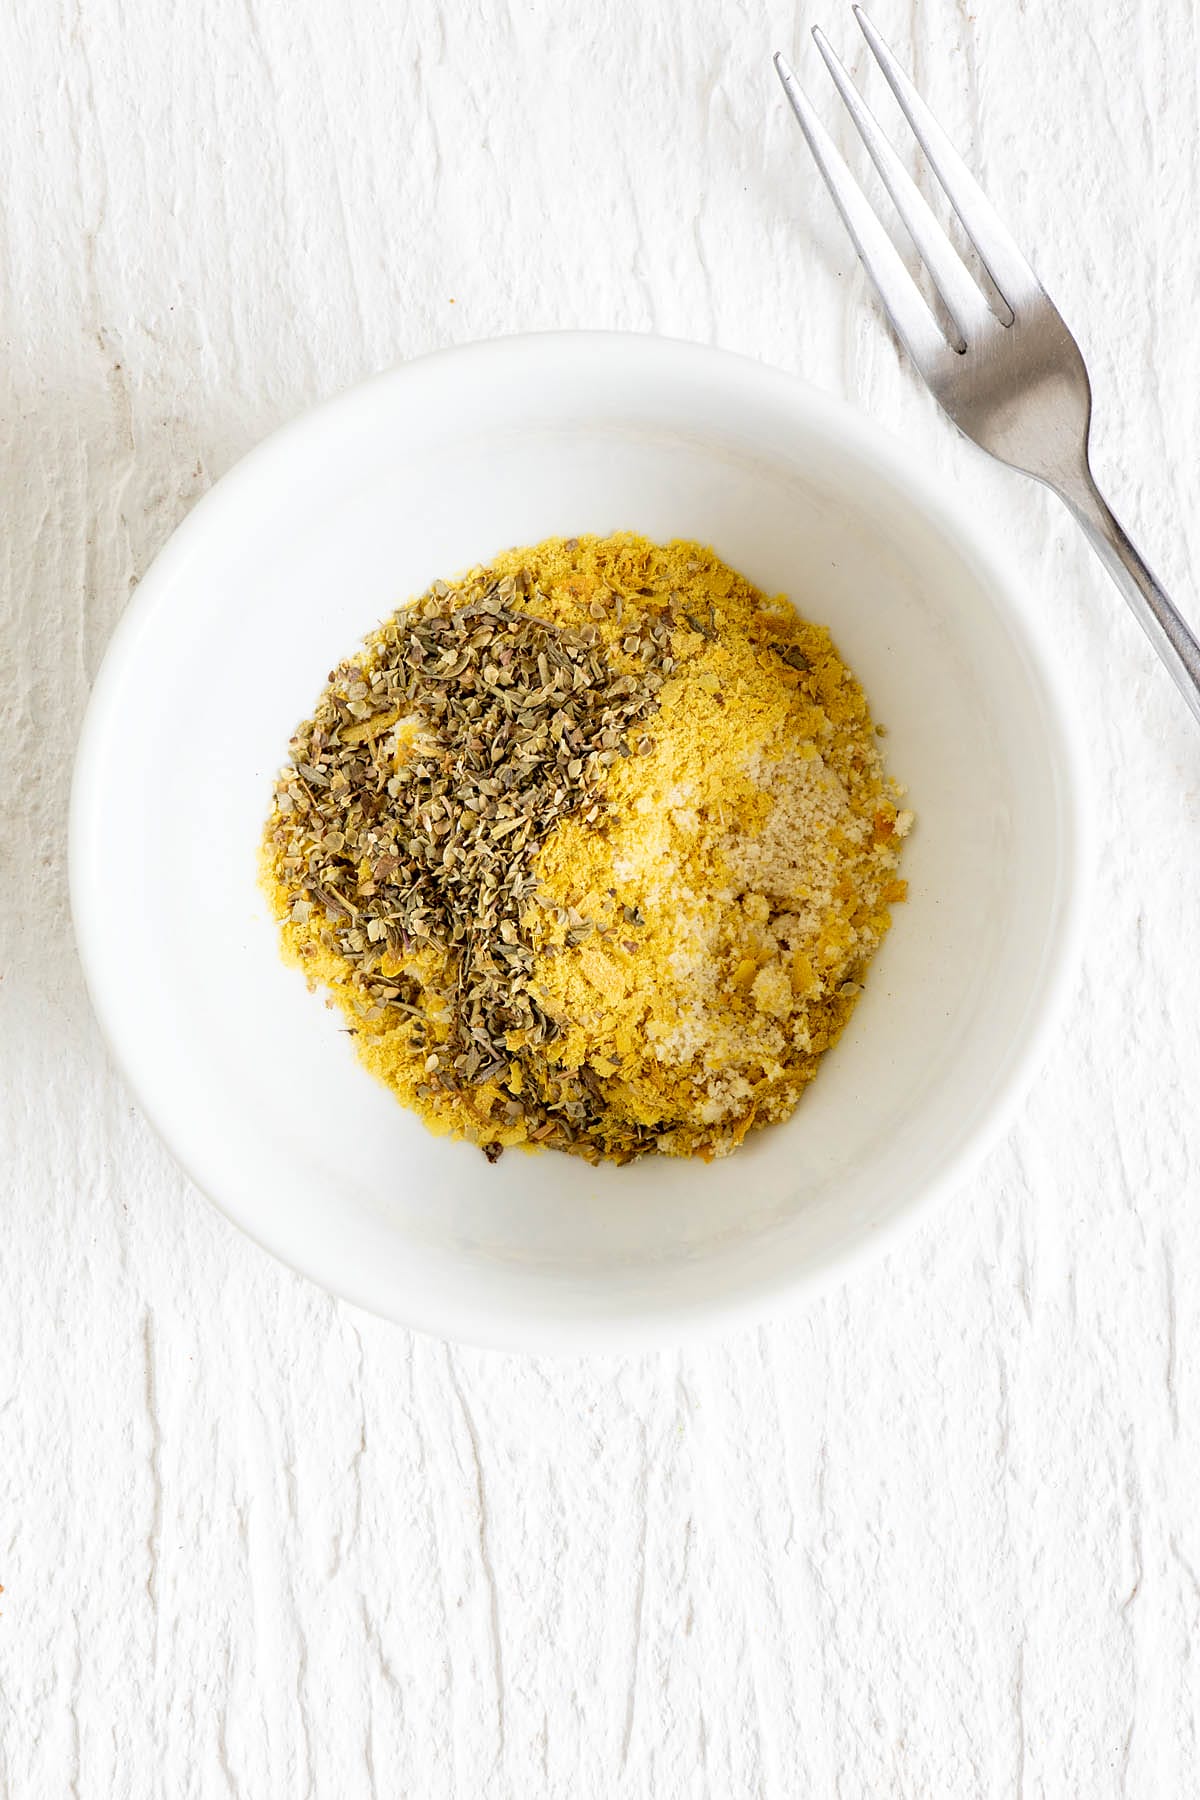 Almond flour, nutritional yeast, and spices in a small bowl.